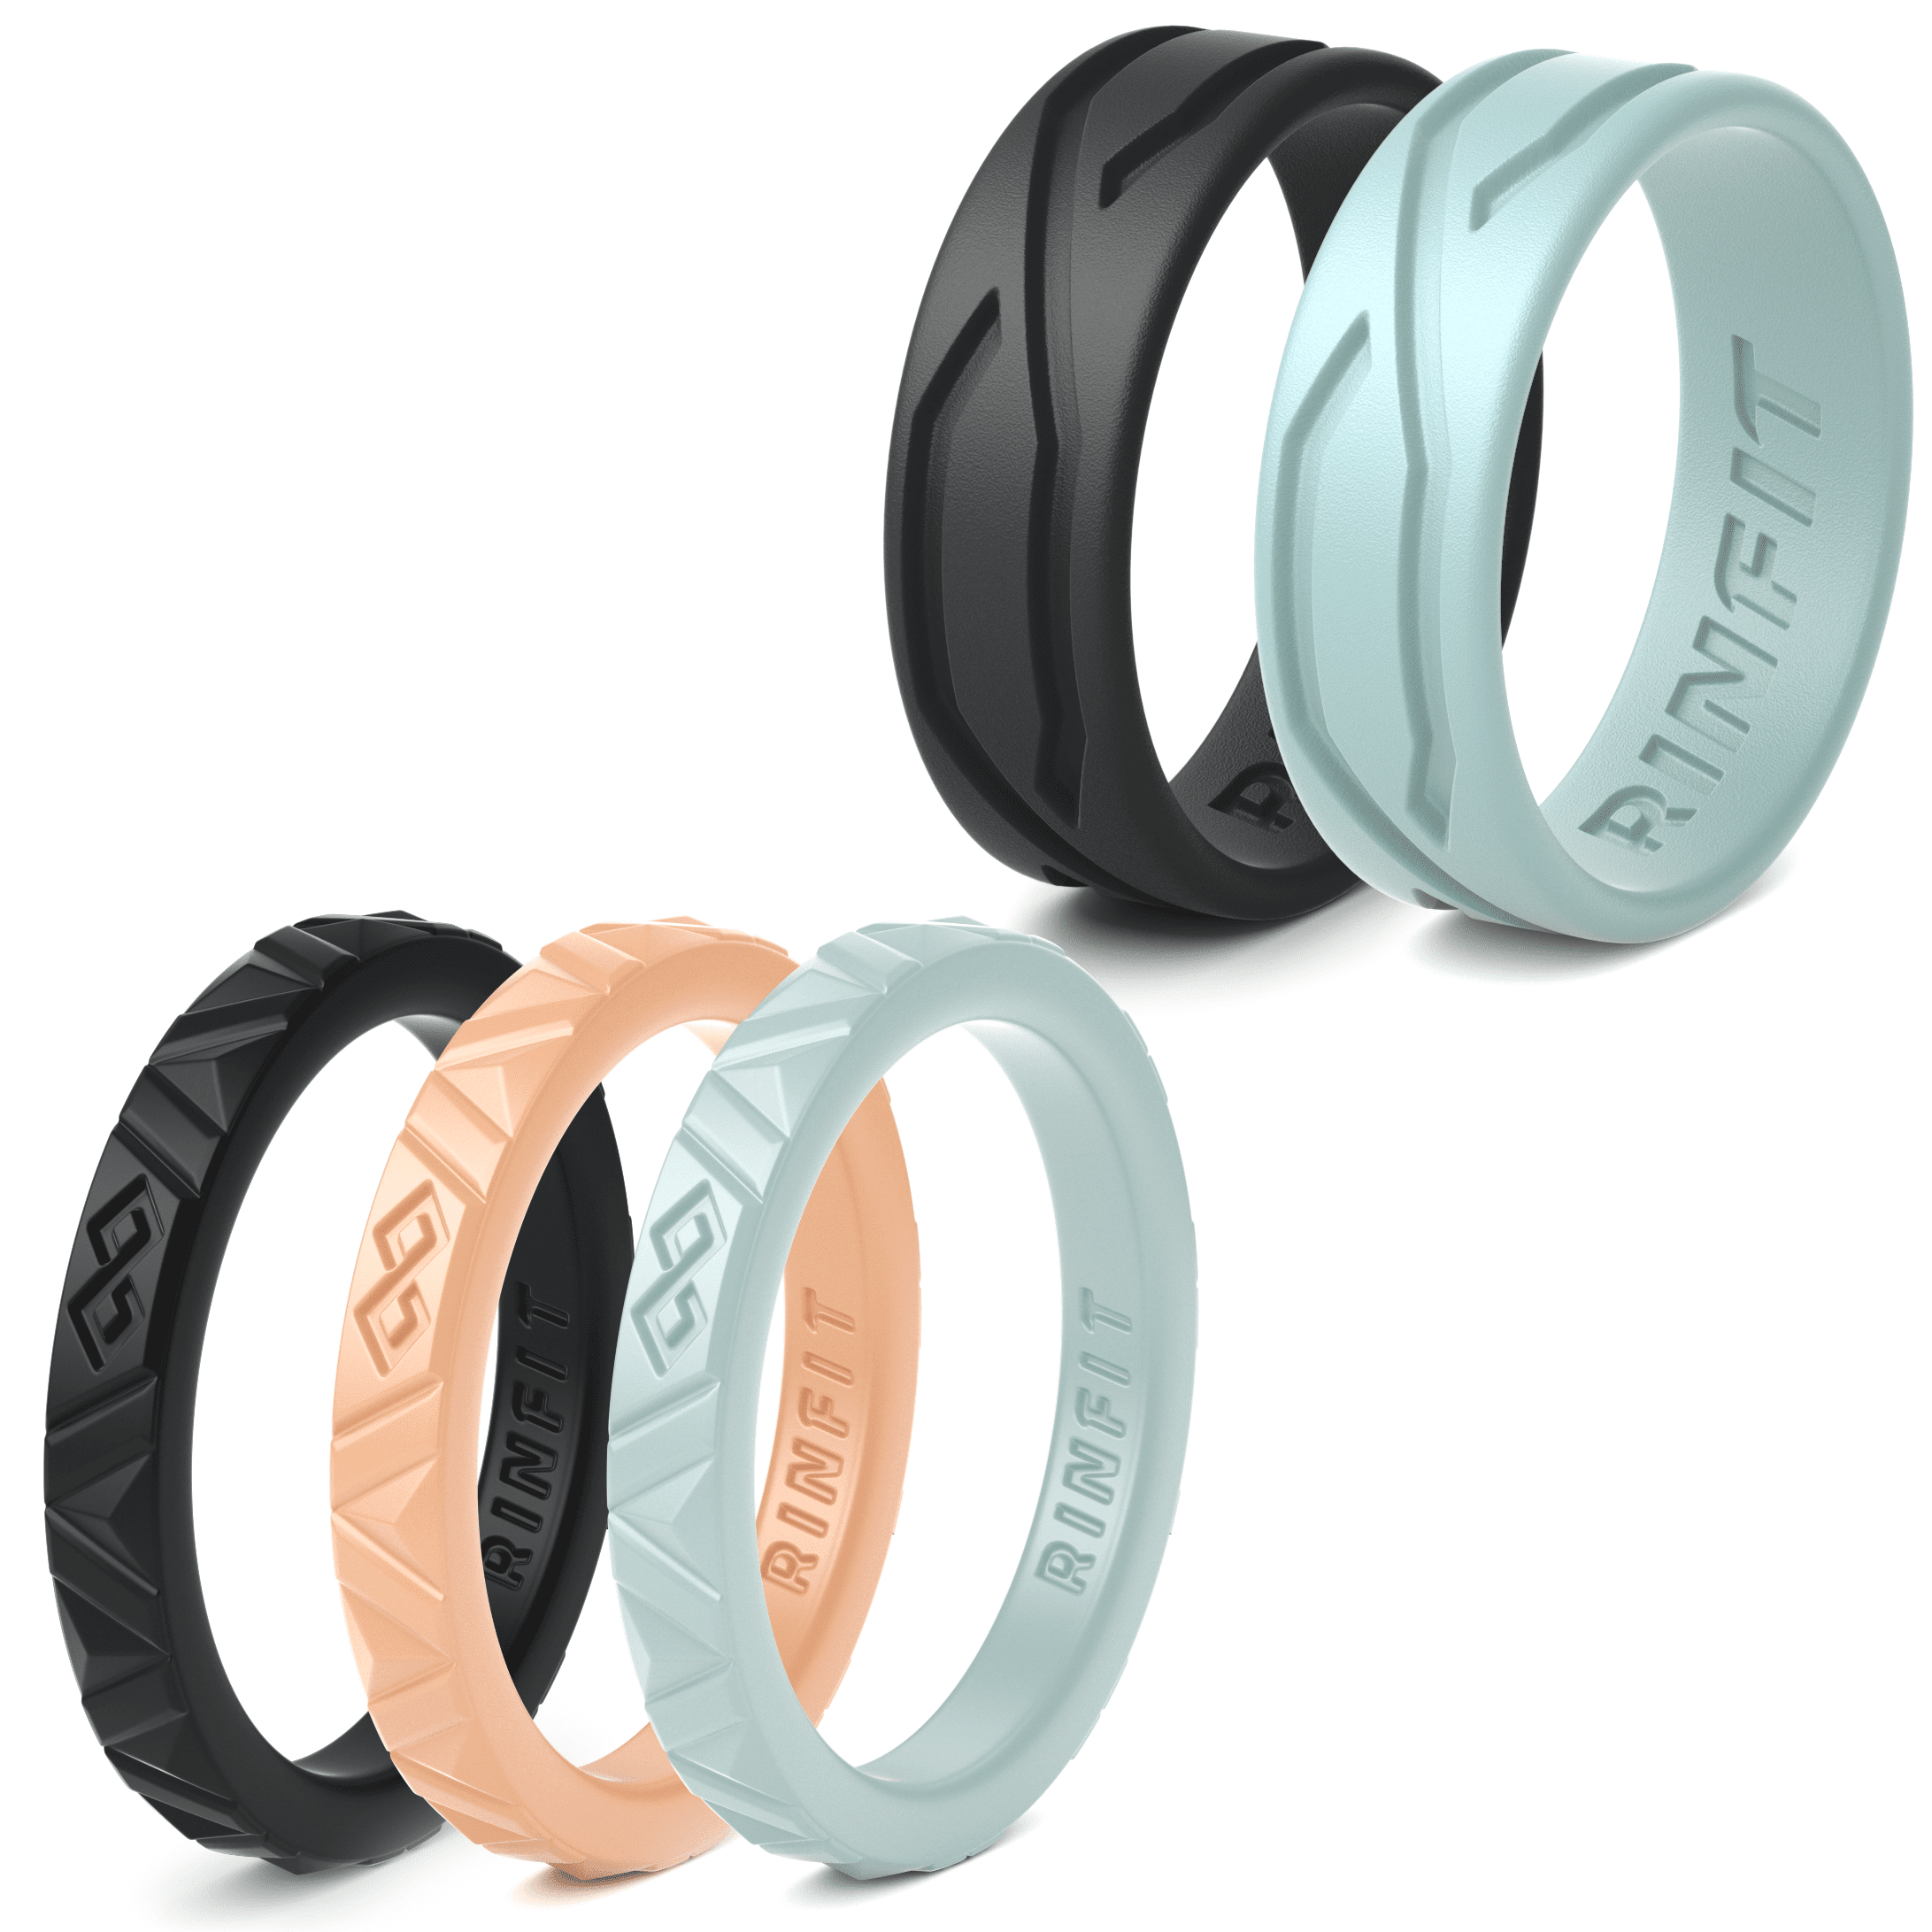 4 Silicone Wedding Band Ring Women Safe Flexible Antibacterial Rubber Size 7 NEW 